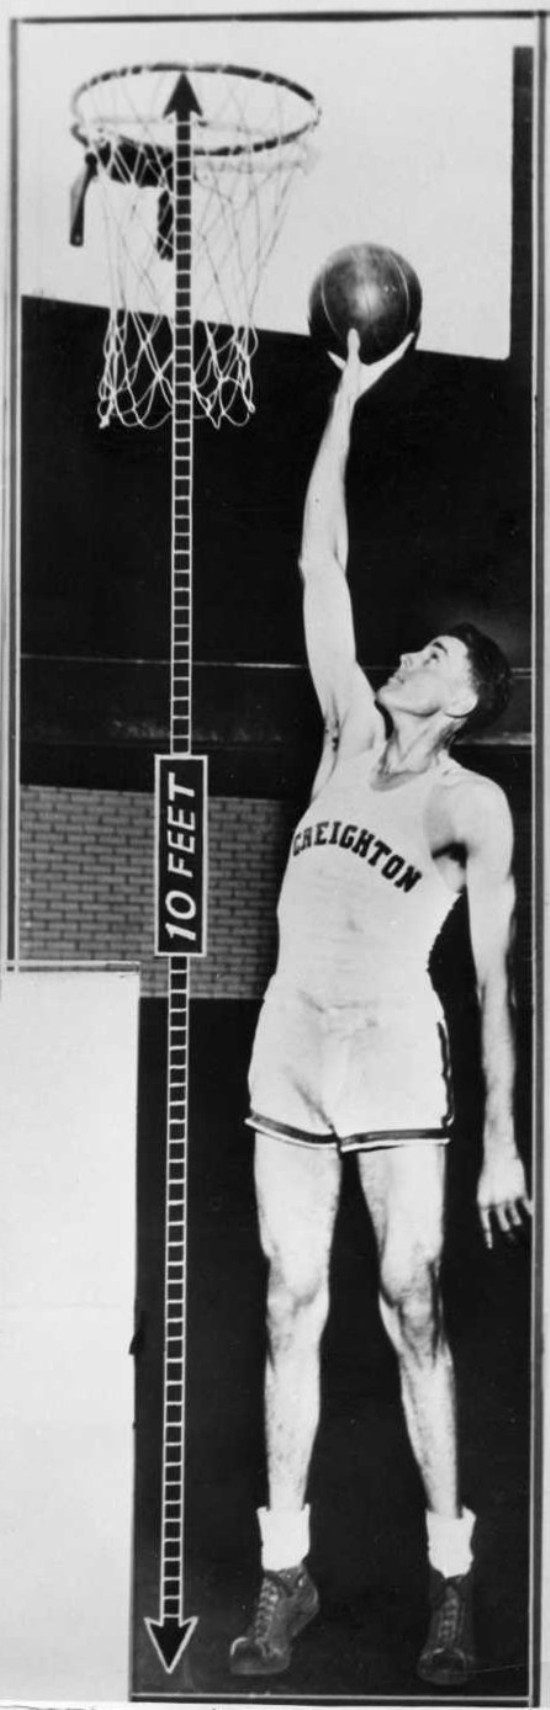 Willard Schmidt won a gold medal in the 1936 Olympics